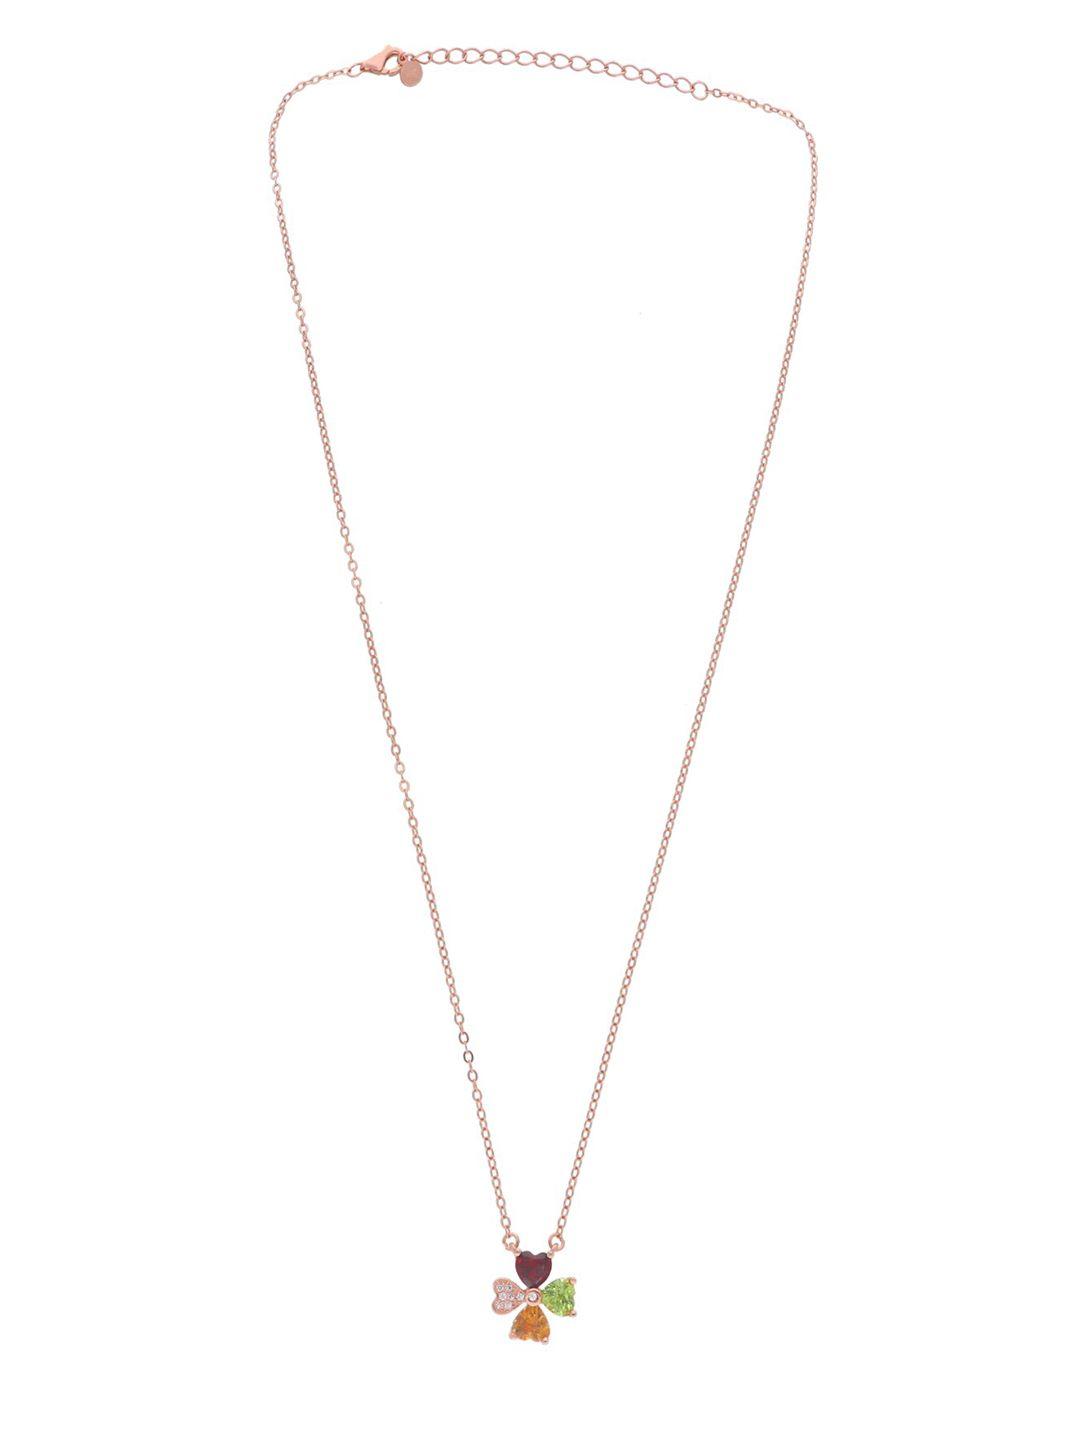 curio cottage rose gold-plated clover leaf pure silver chain necklace